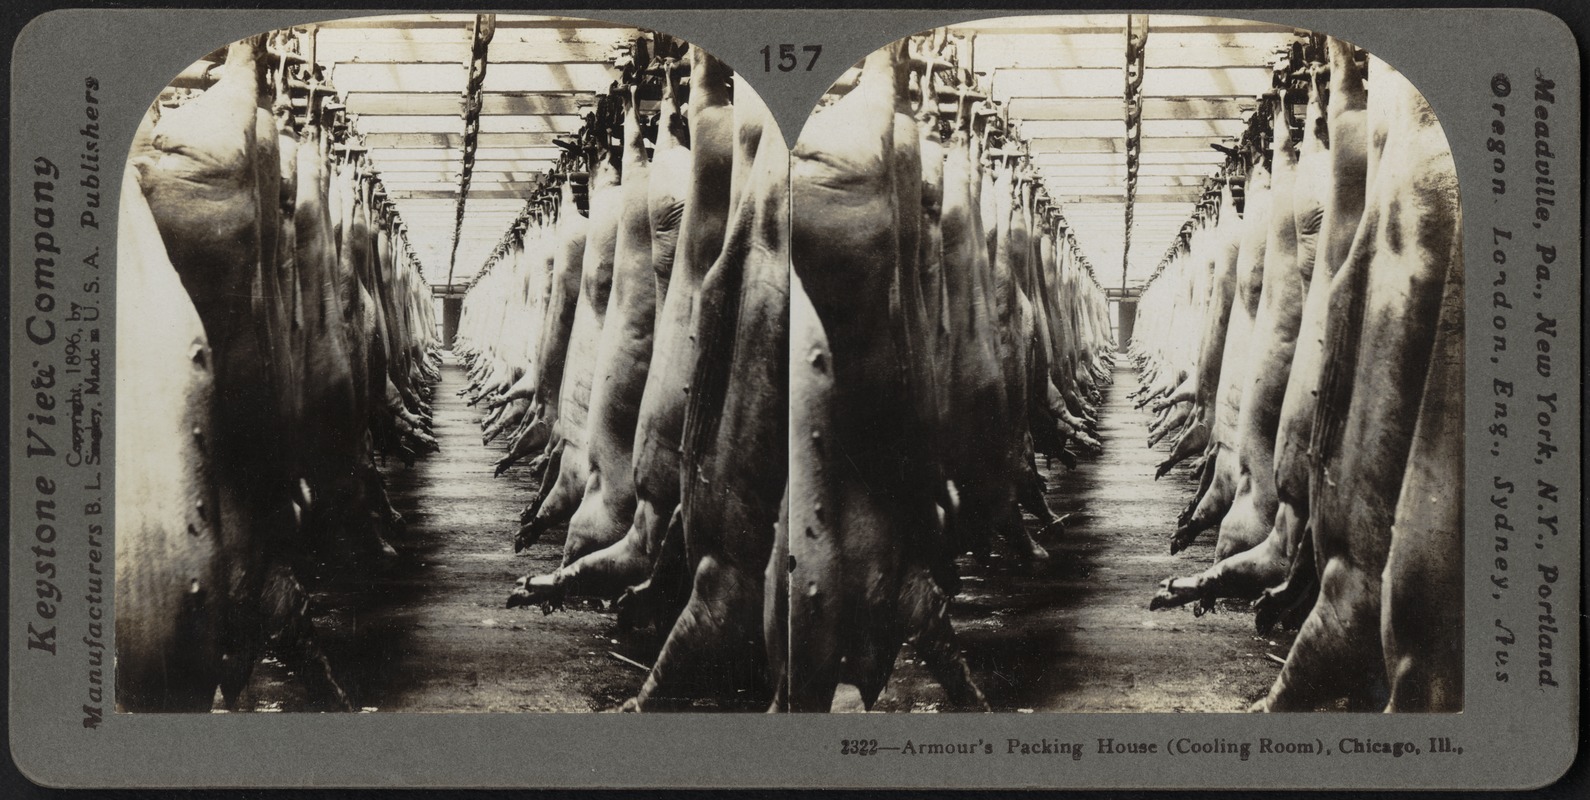 Armour's packing house (cooling room), Chicago, Ill., U.S.A.